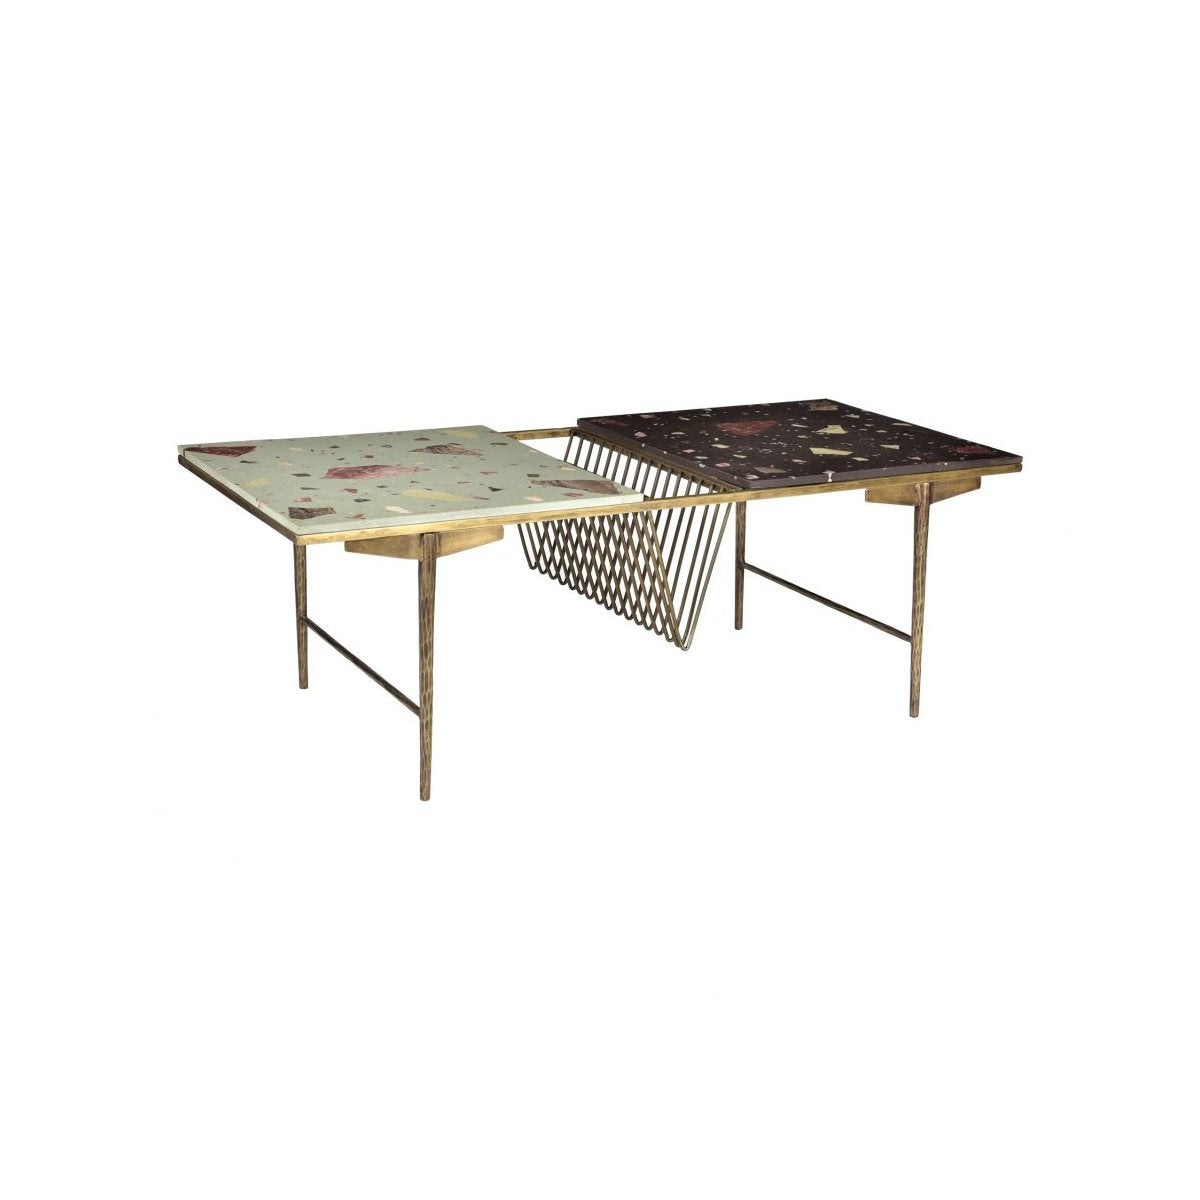 Load image into Gallery viewer, Mosaic Coffee Table Coffee Tables Moe&amp;#39;s     Four Hands, Burke Decor, Mid Century Modern Furniture, Old Bones Furniture Company, Old Bones Co, Modern Mid Century, Designer Furniture, https://www.oldbonesco.com/
